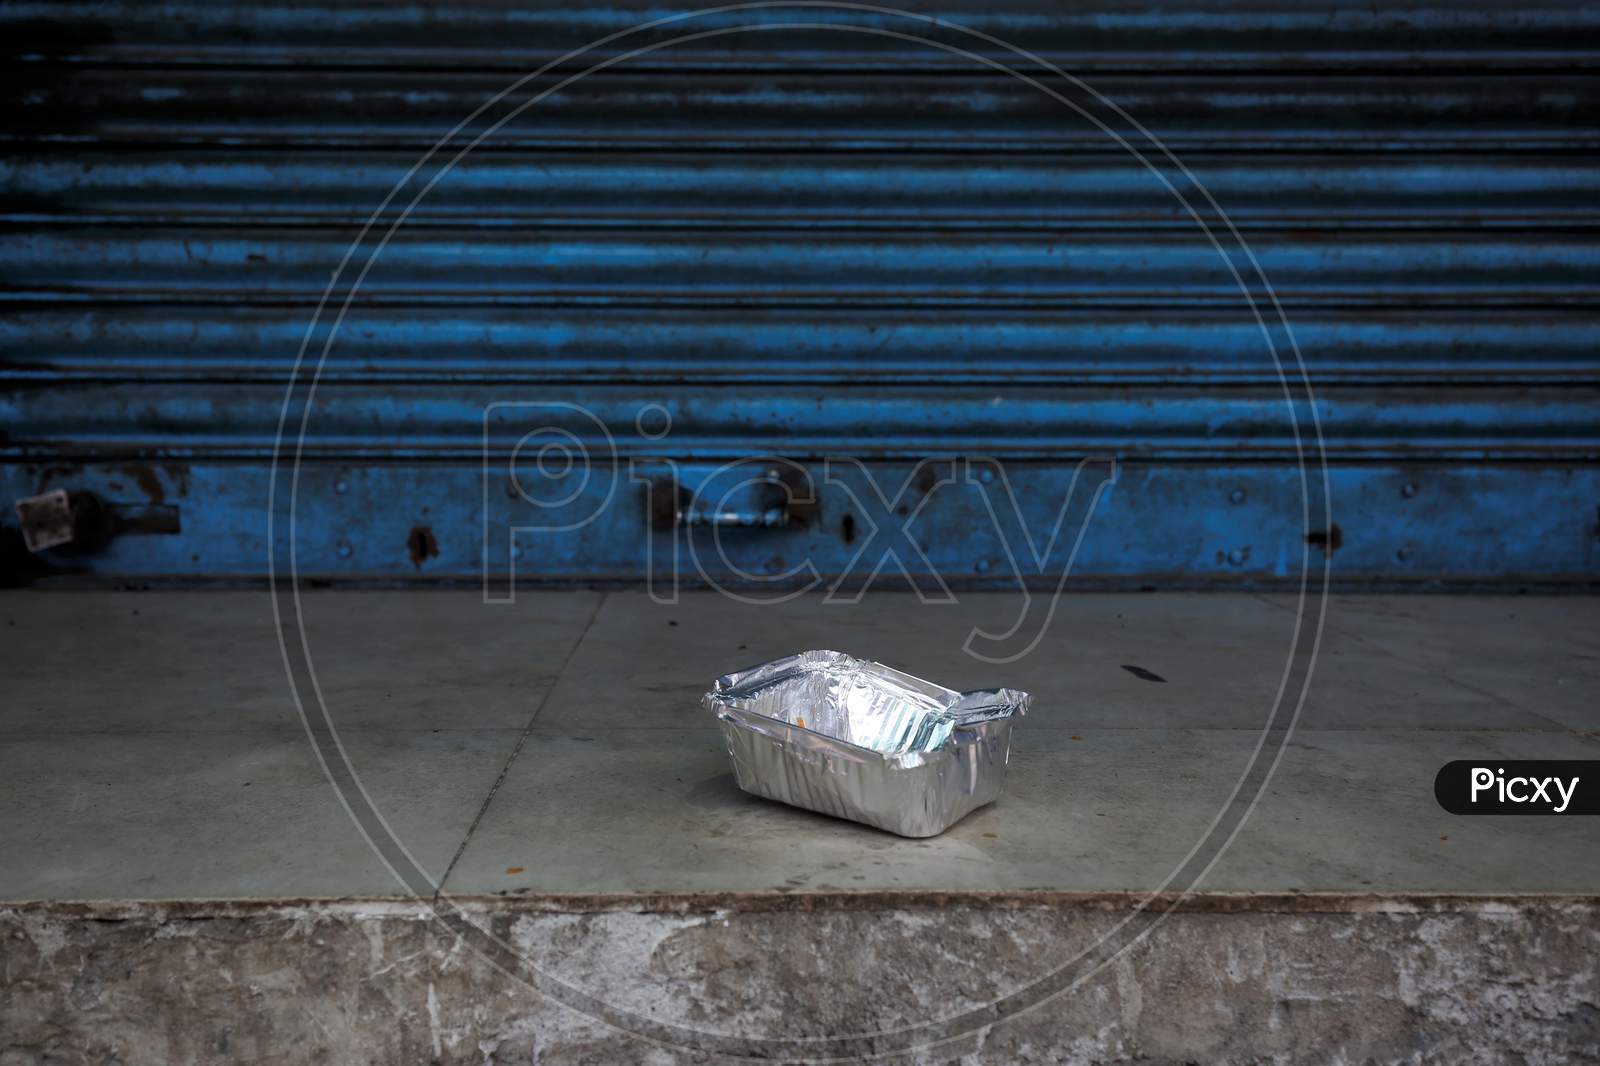 A box with partially eaten food is seen outside a shuttered shop during the nationwide lockdown to stop the spread of Coronavirus (COVID-19) in Bangalore, India, May 01, 2020.